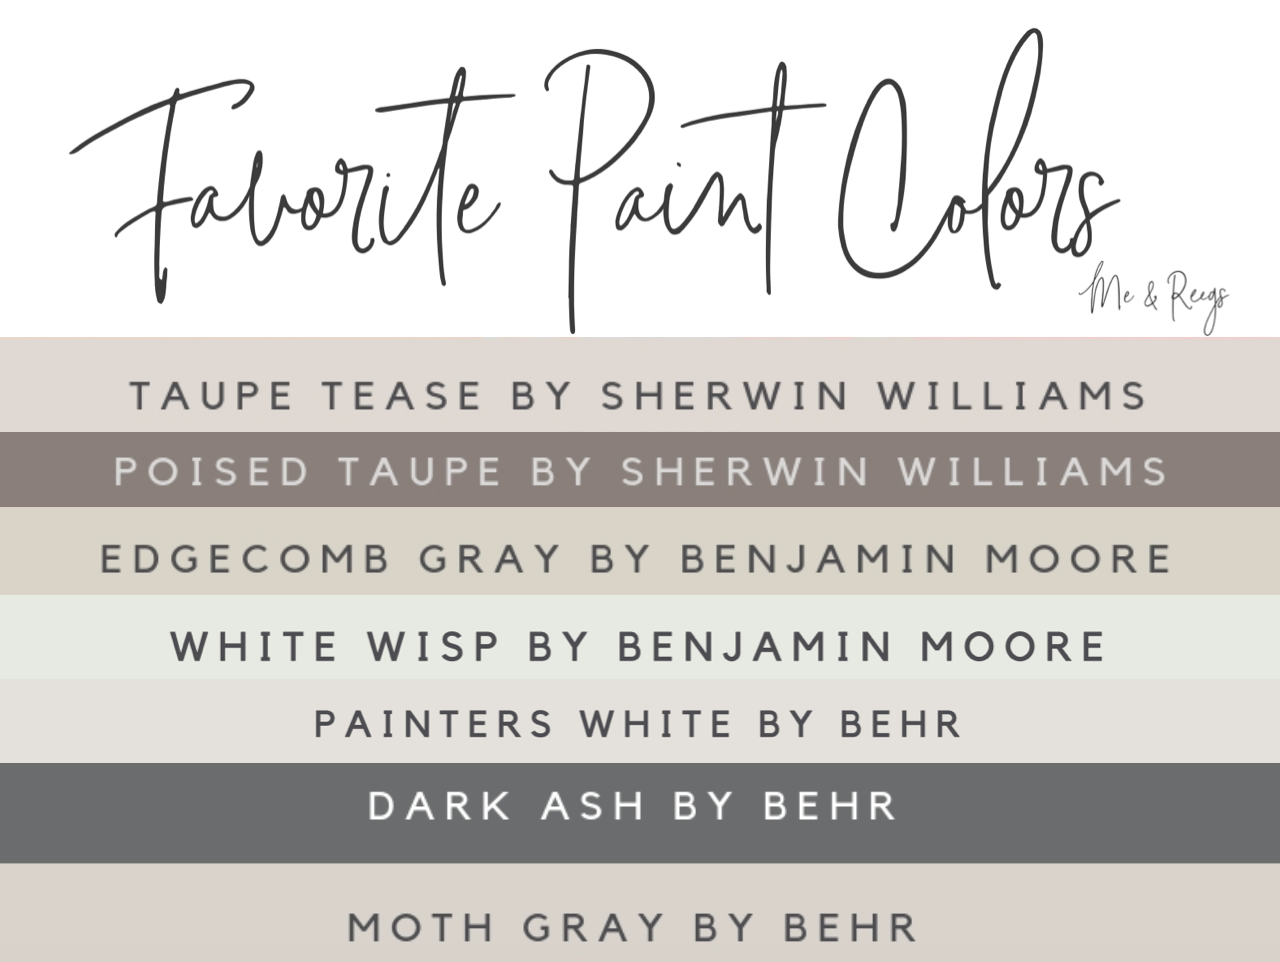 Master-List-Neutral-Paint-Colors-Sherwin-Williams-Behr-Benjamin-Moore-Taupe-Tease-Paised-Taupe-Edgecomb-Gray-Painters-White-Dark-Ashe-Moth-Gray The Best Neutral Paint Colors for Your Home | Master List